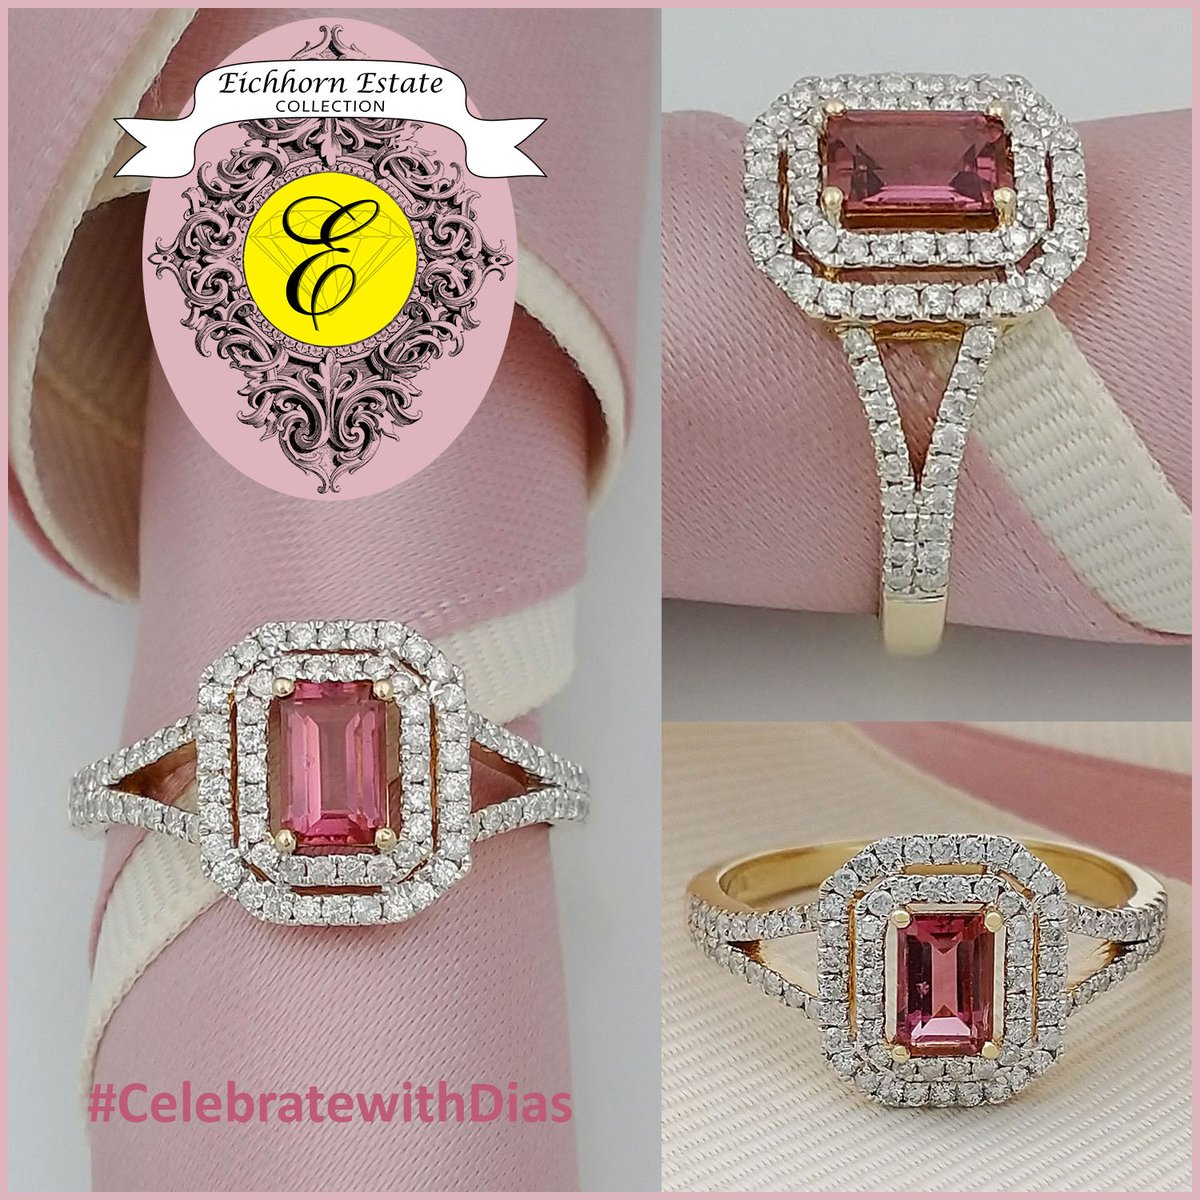 14K yellow gold Ring with a .47 carat emerald-cut Pink Tourmaline and 88 round brilliant-cut Diamonds = .52 carat total weight, size 7.5. From Our Estate Collection $1,500. eichhornjewelry.com/estate-collect… #start2sparkle #eichhornglow #1diamondatatime #CelebratewithDias #ColorWithYourDias